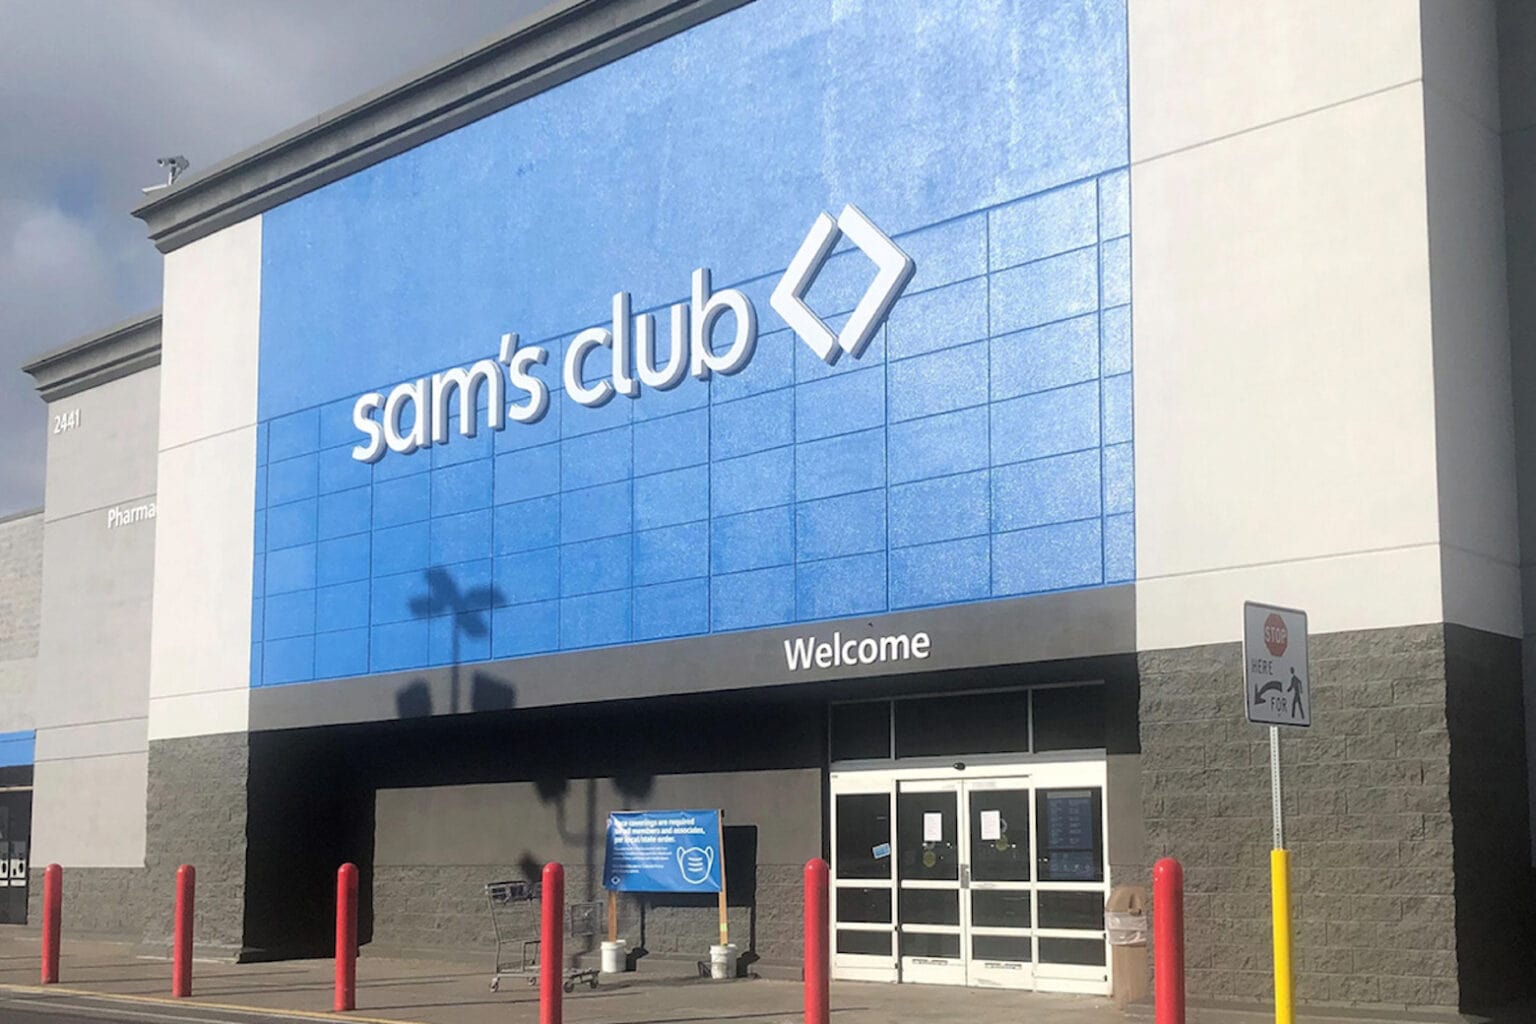 You can grab a one-year Sam's Club membership with auto-renew for only $20.